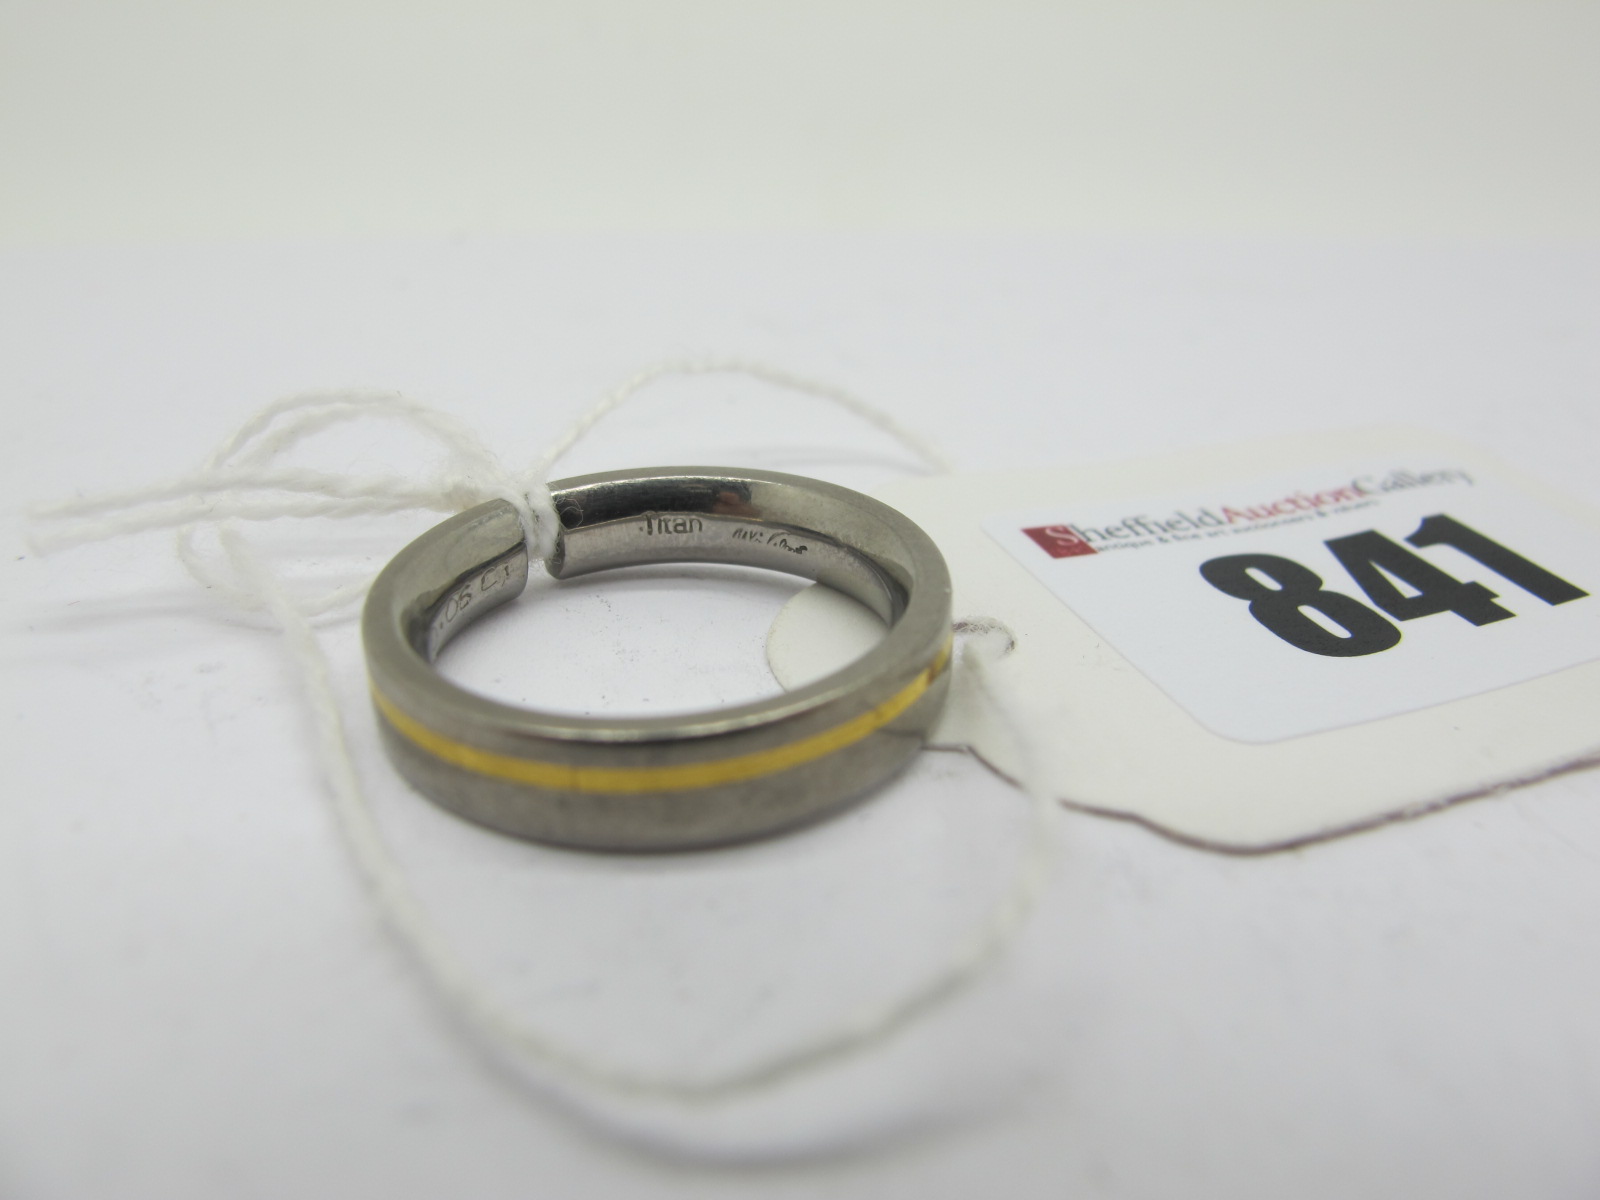 A Modern Two Colour Band Ring, with inset highlight, stamped "Titan" (finger size O).